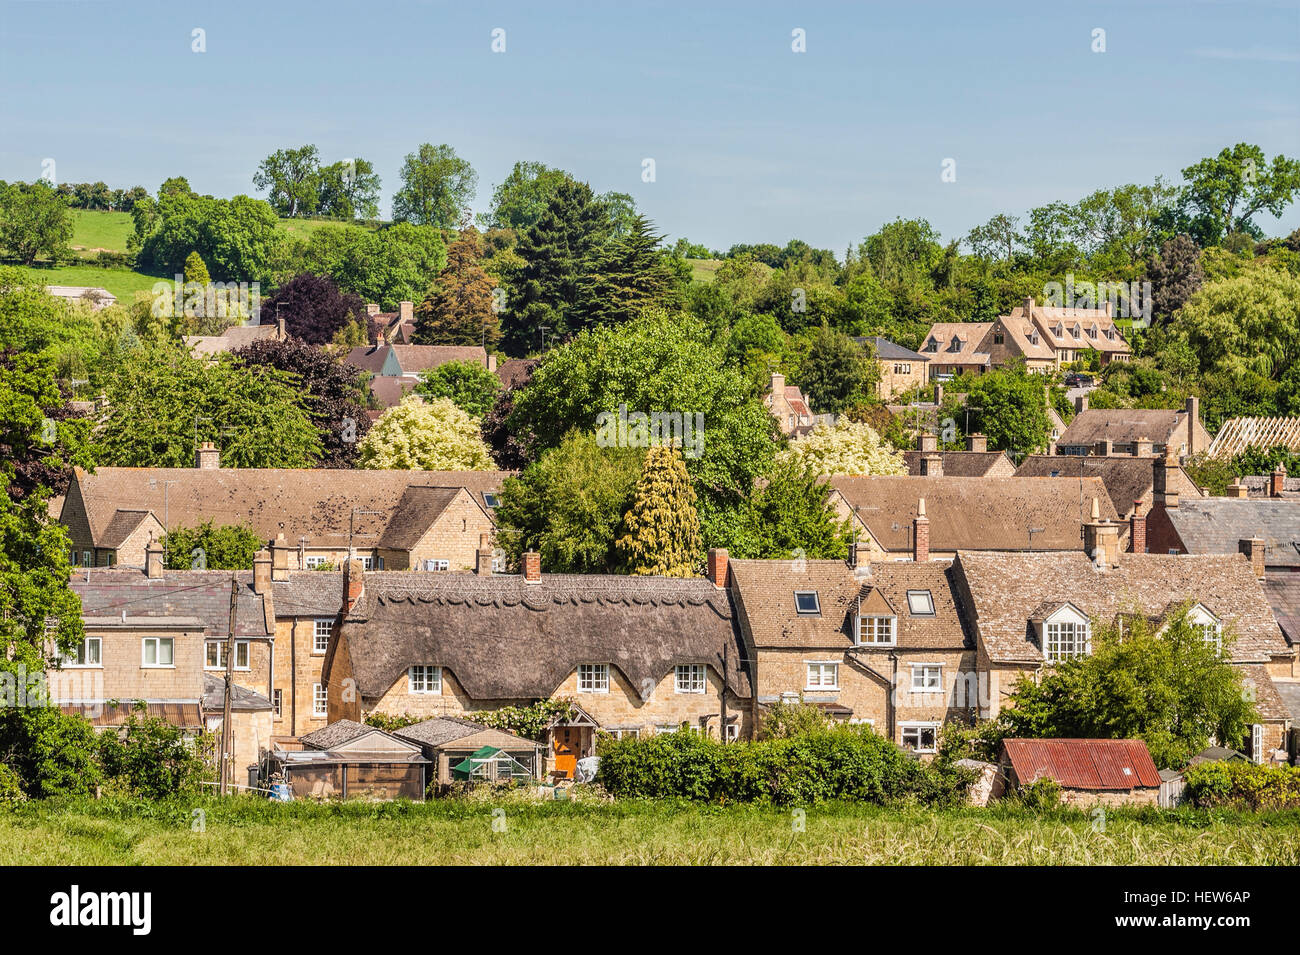 Chipping Campden a small market town within the Cotswold district of Gloucestershire, England. Stock Photo